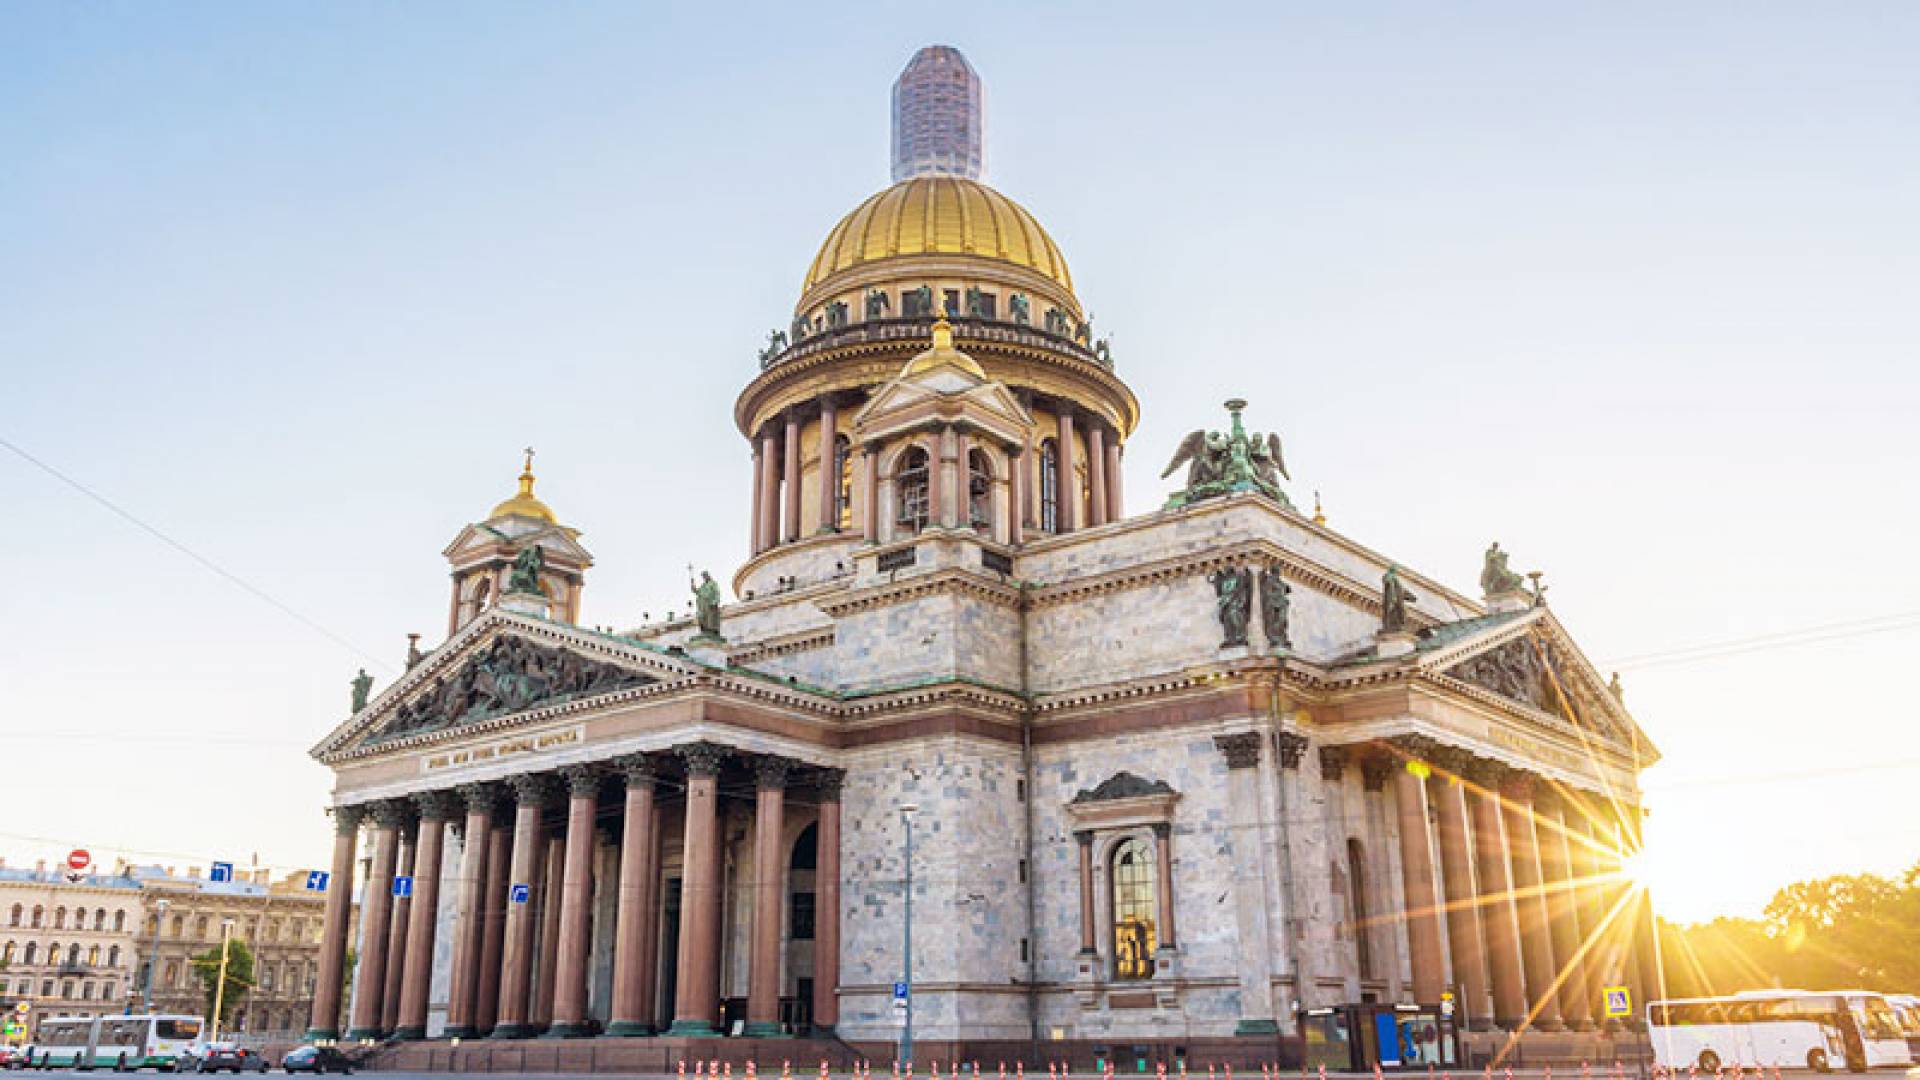 ST. ISAAC'S CATHEDRAL, Introduction